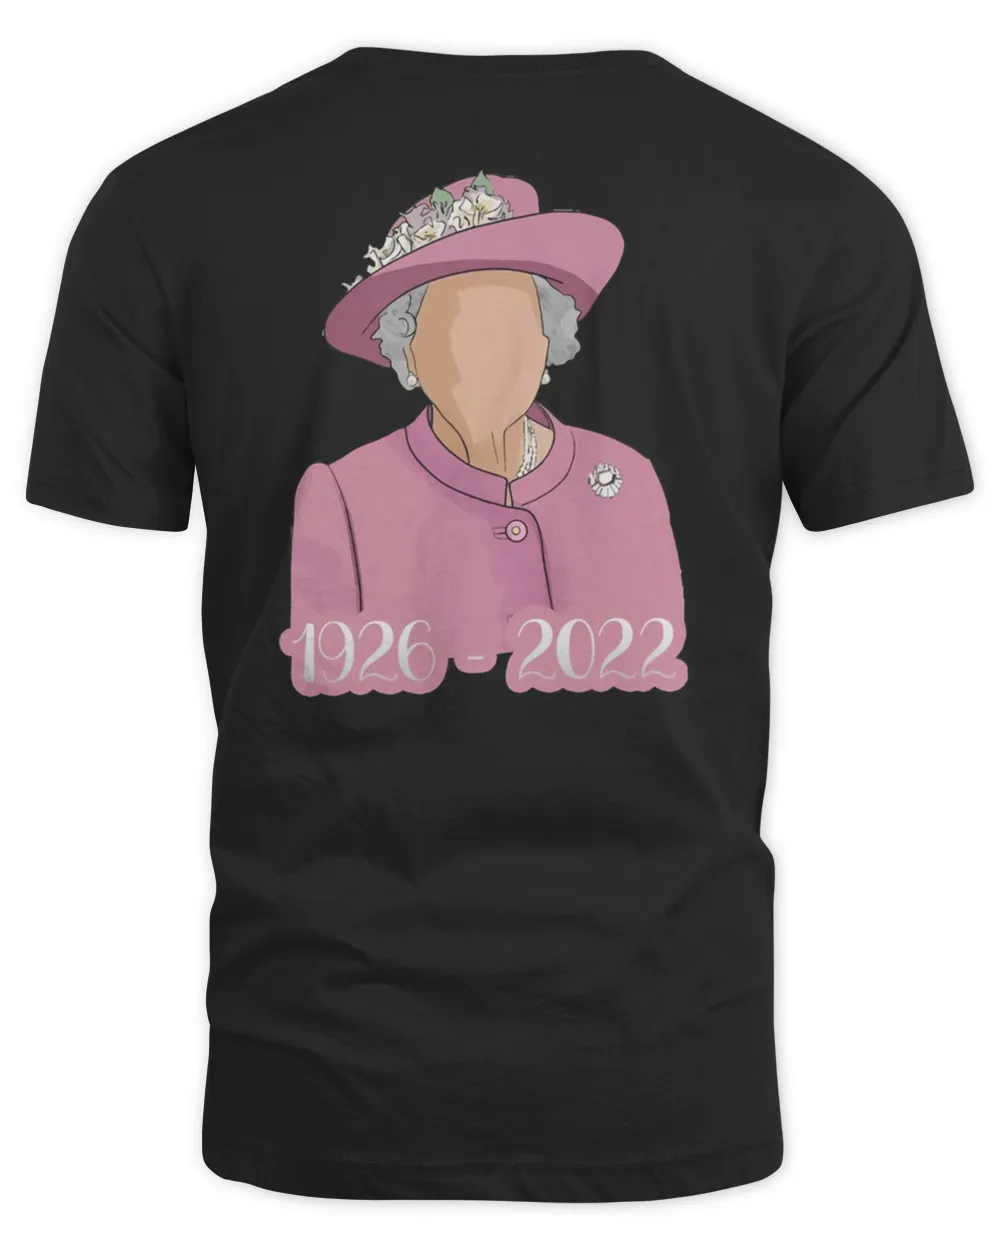 RIP Queen Elizabeth ll 1926-2022 The Queen Rest In Peace Majesty Shirt